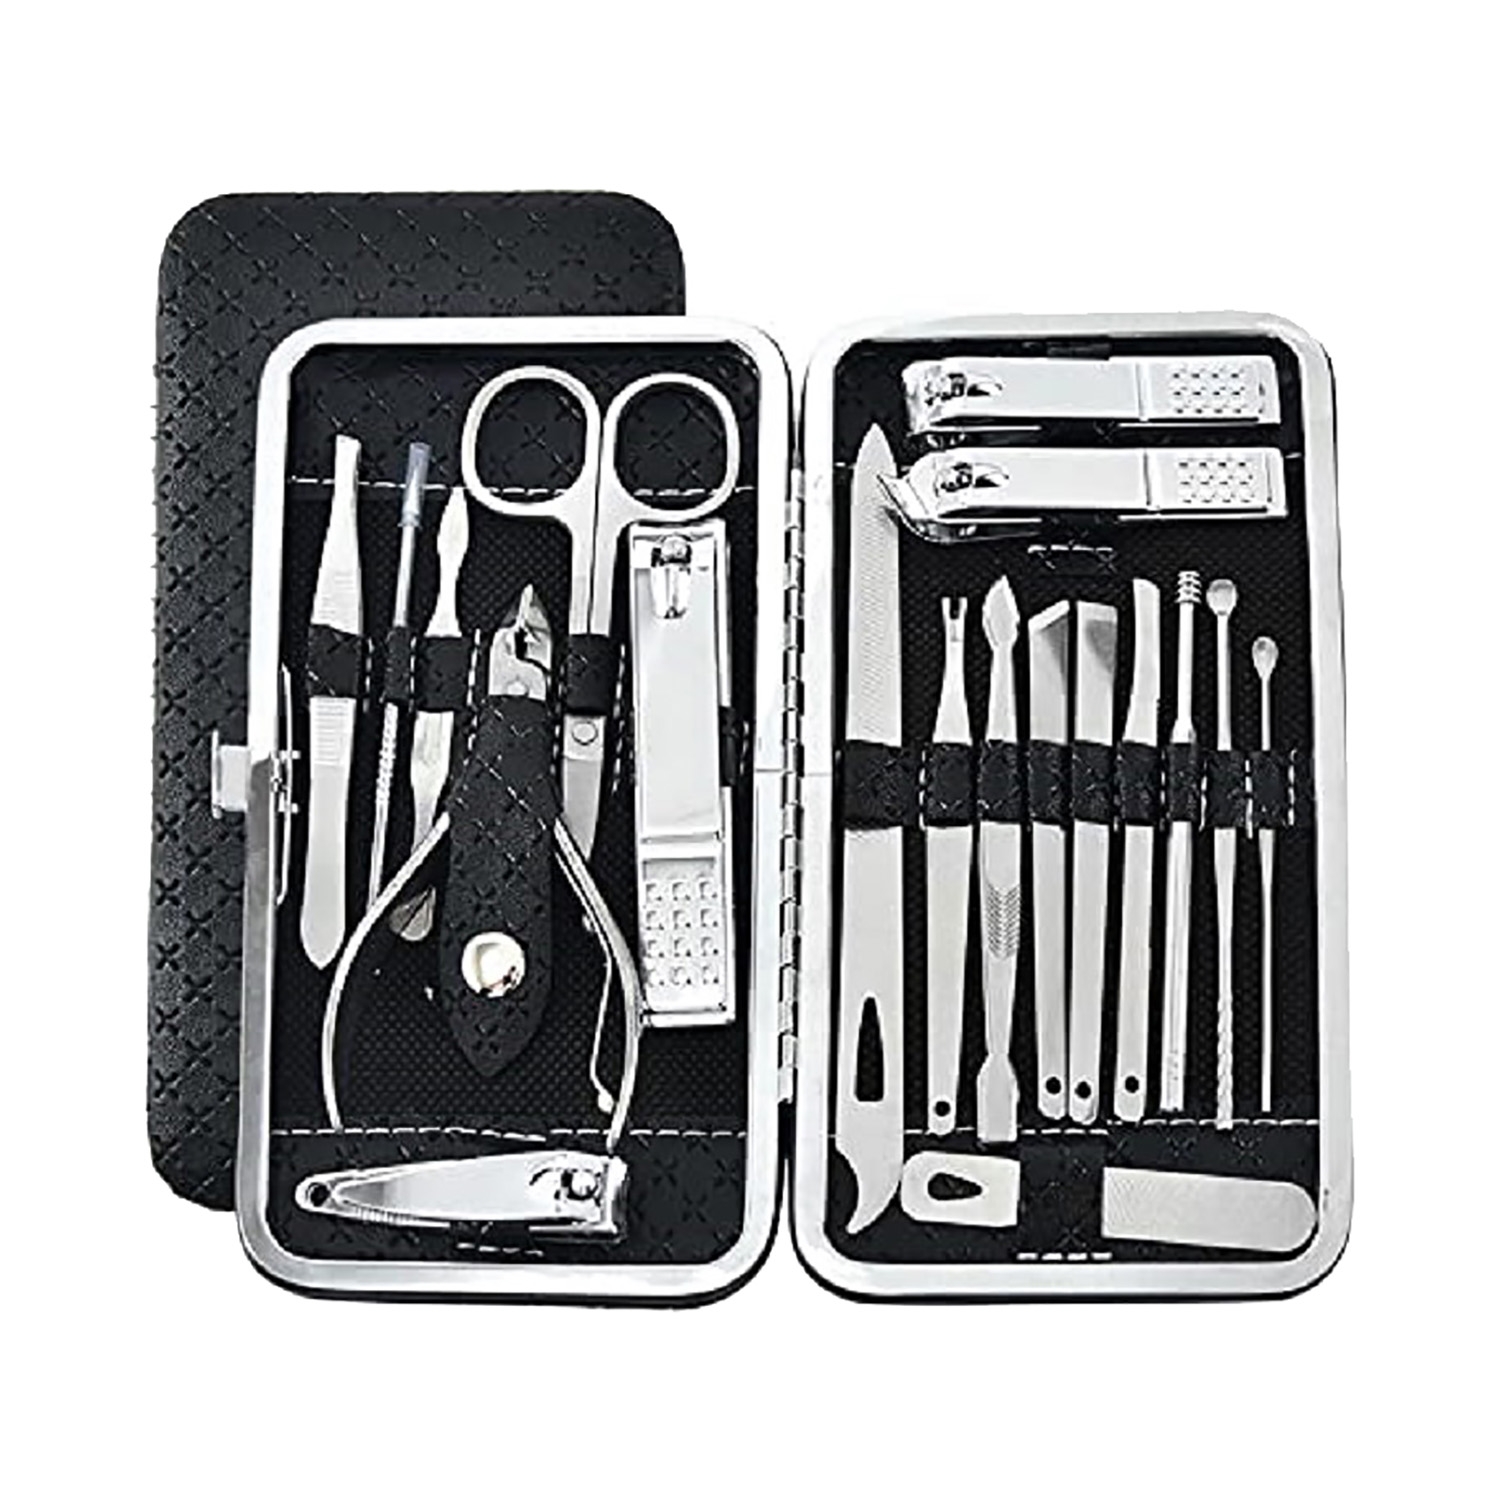 Bronson Professional | Bronson Professional Manicure & Pedicure 19-In-1 Tool Kit Set with Storage Box (1Pc)